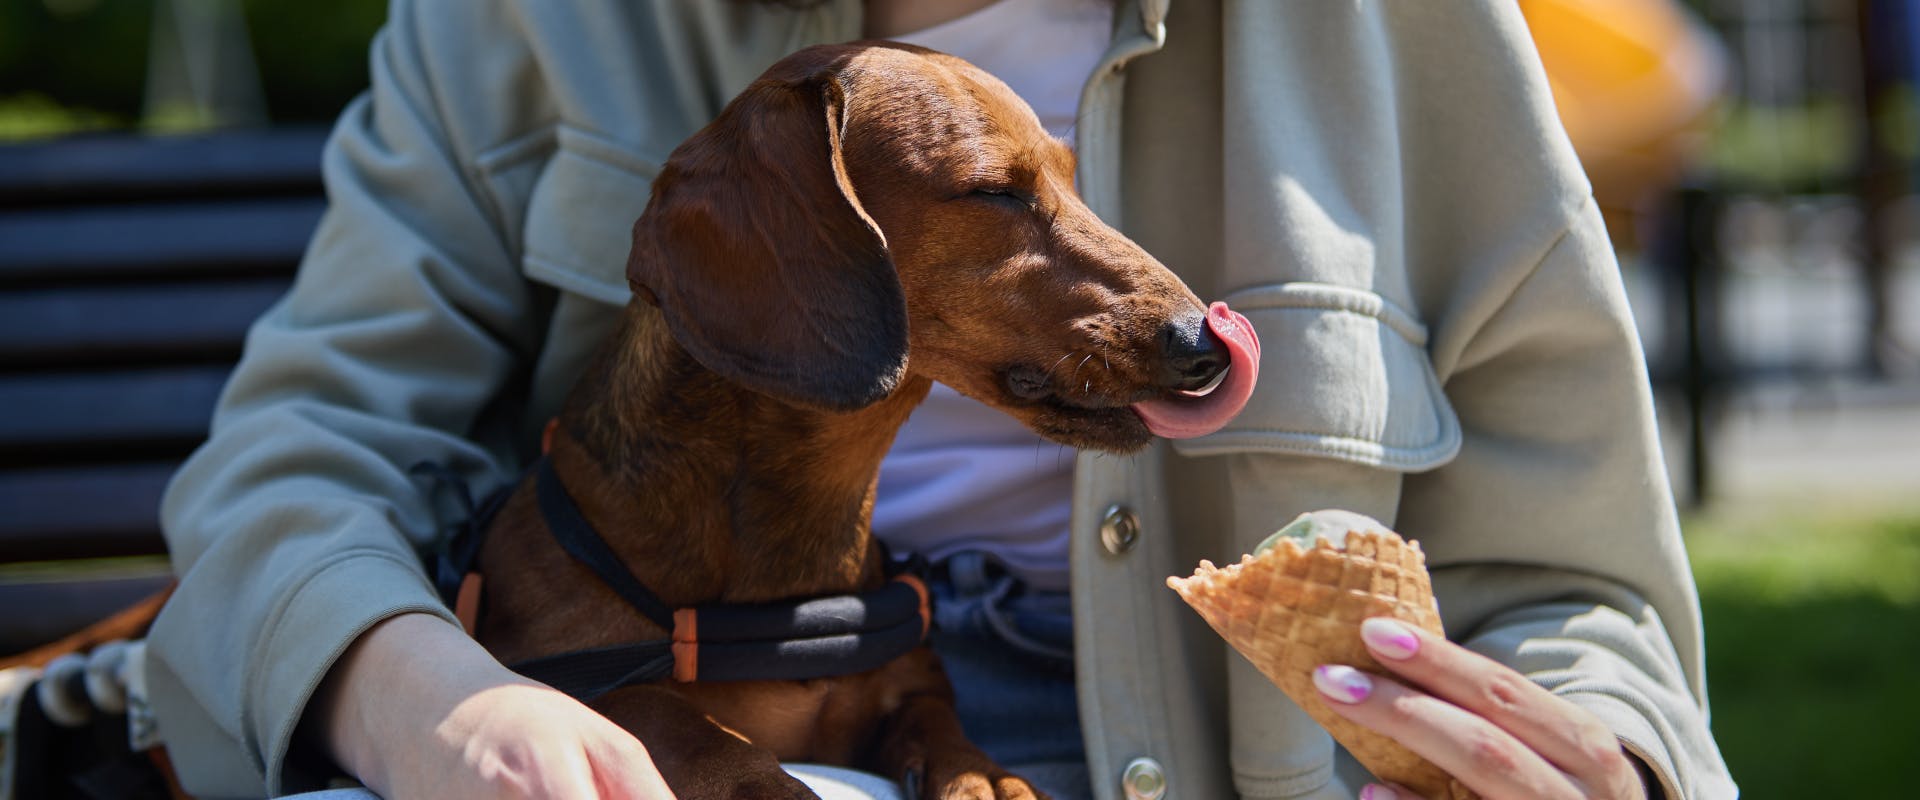 dachshund sitting on a person's lap eating an ice cream 